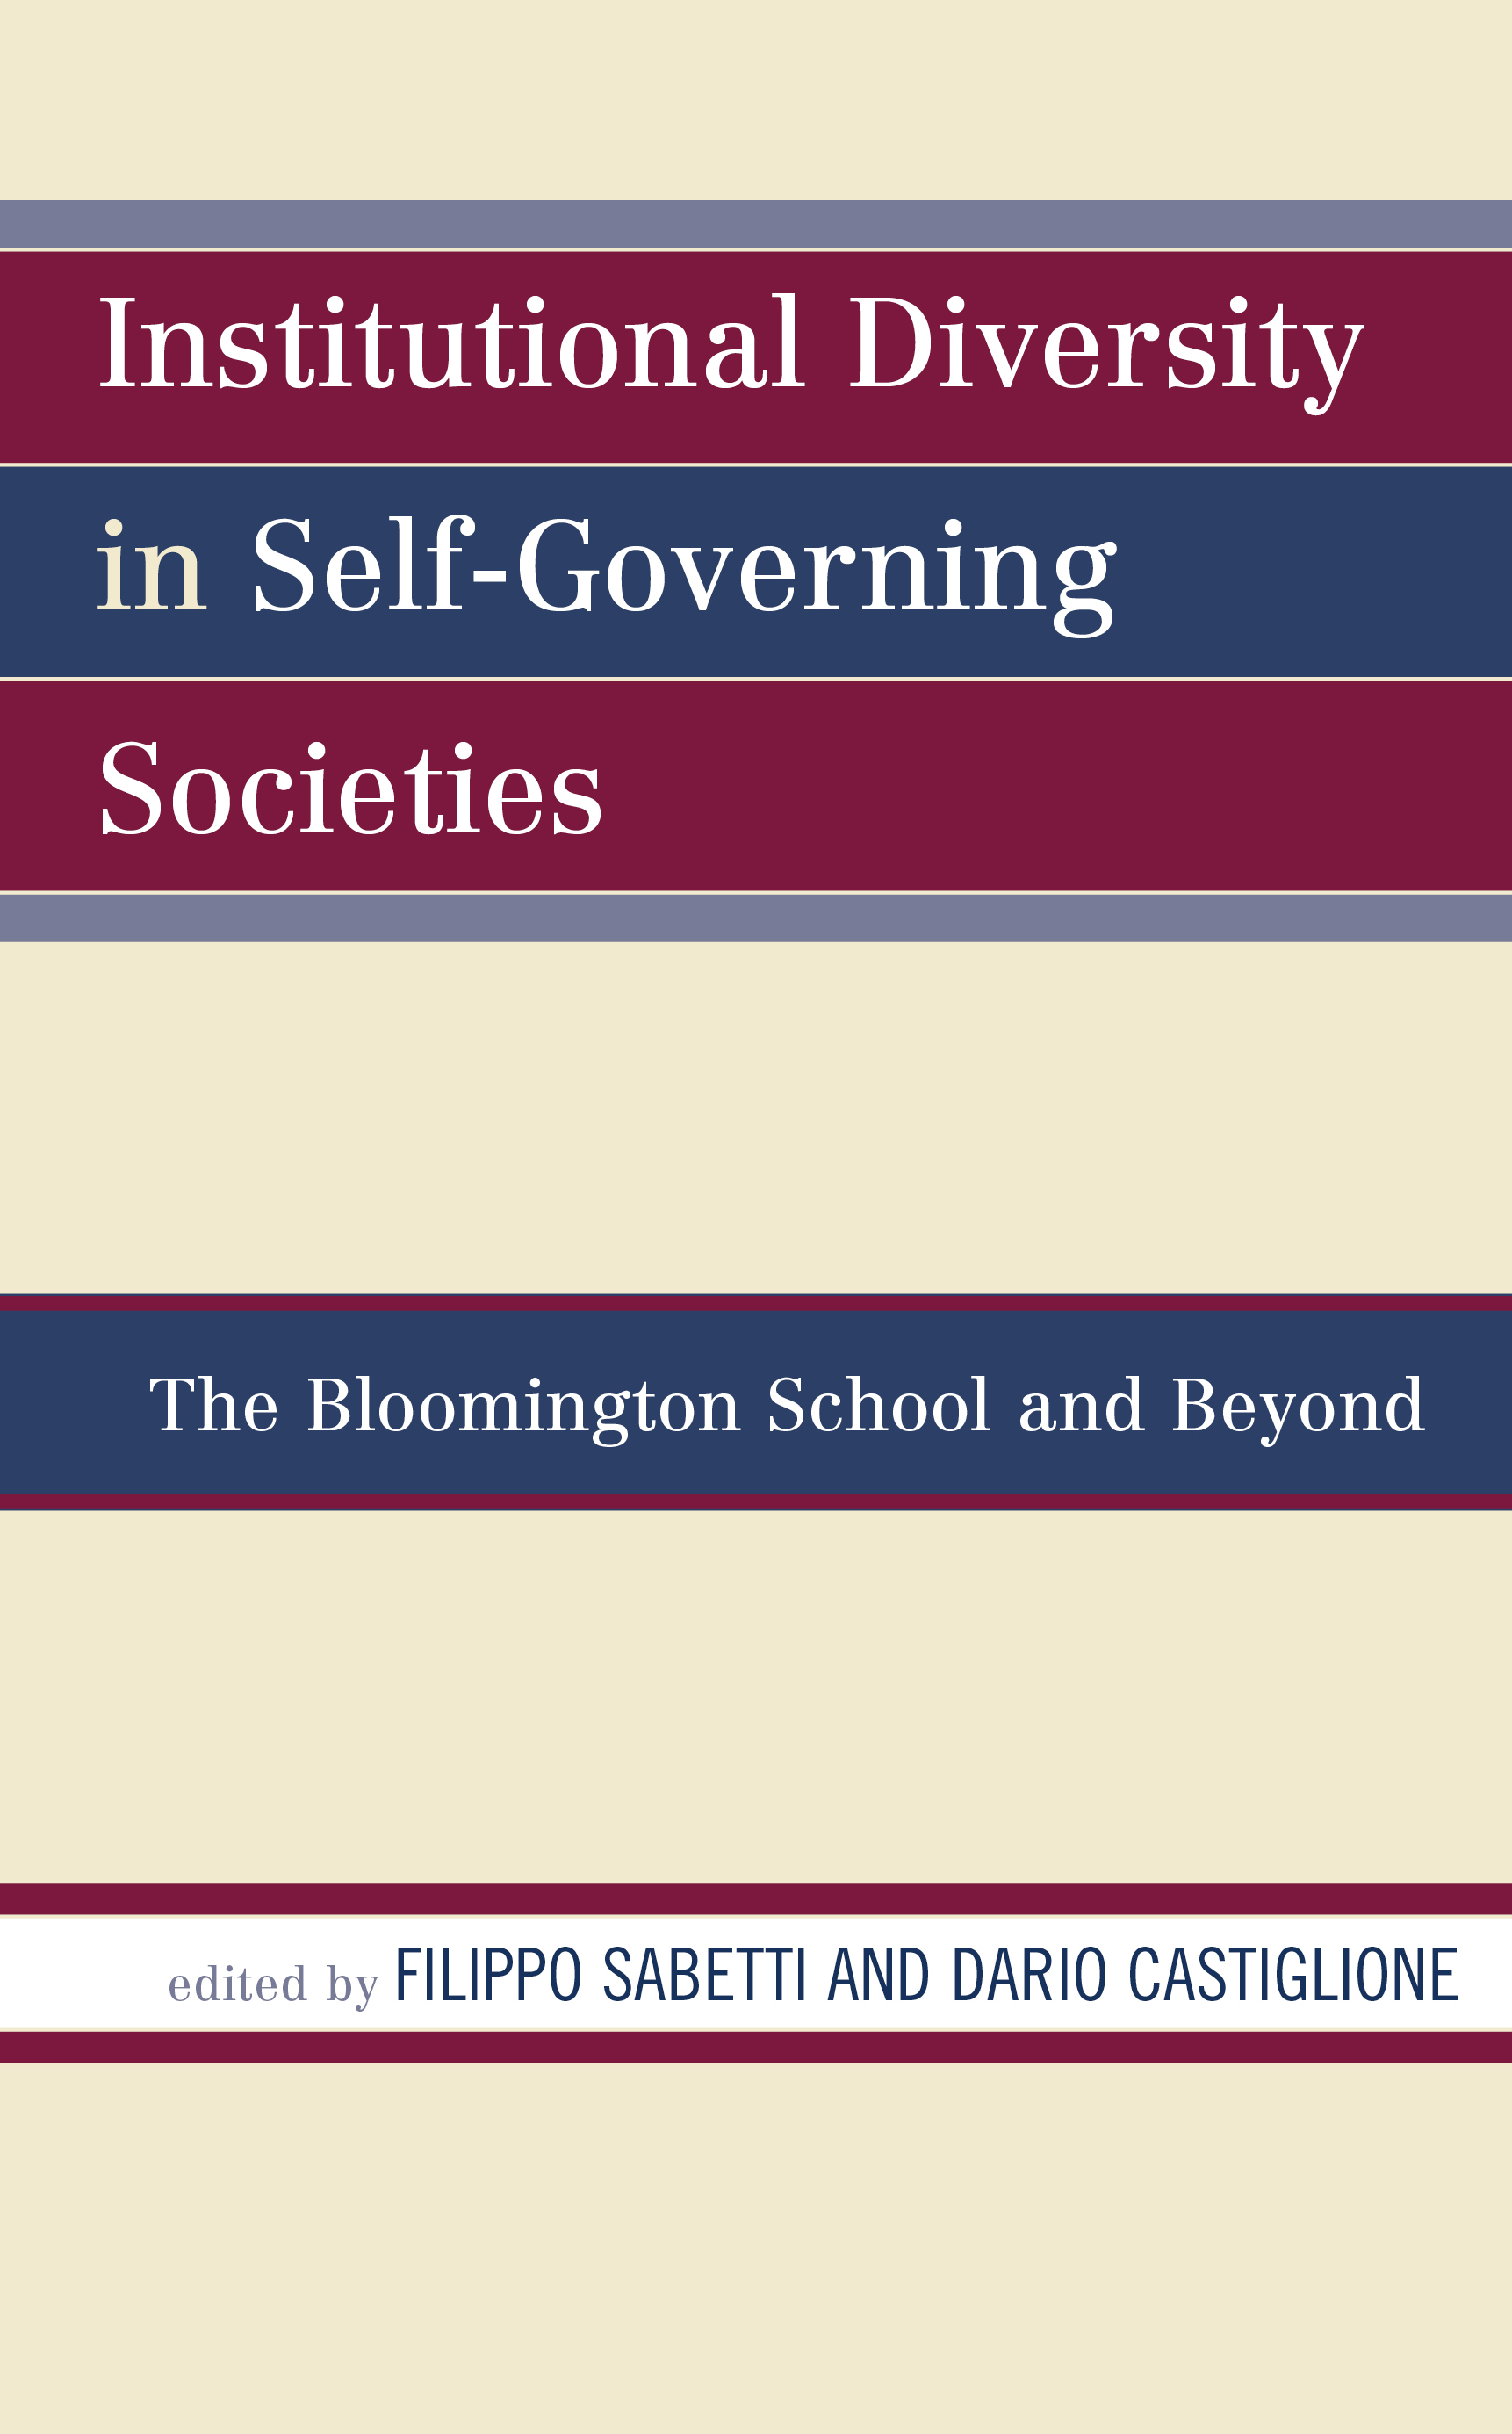 Institutional Diversity in Self-Governing Societies: The Bloomington School and Beyond